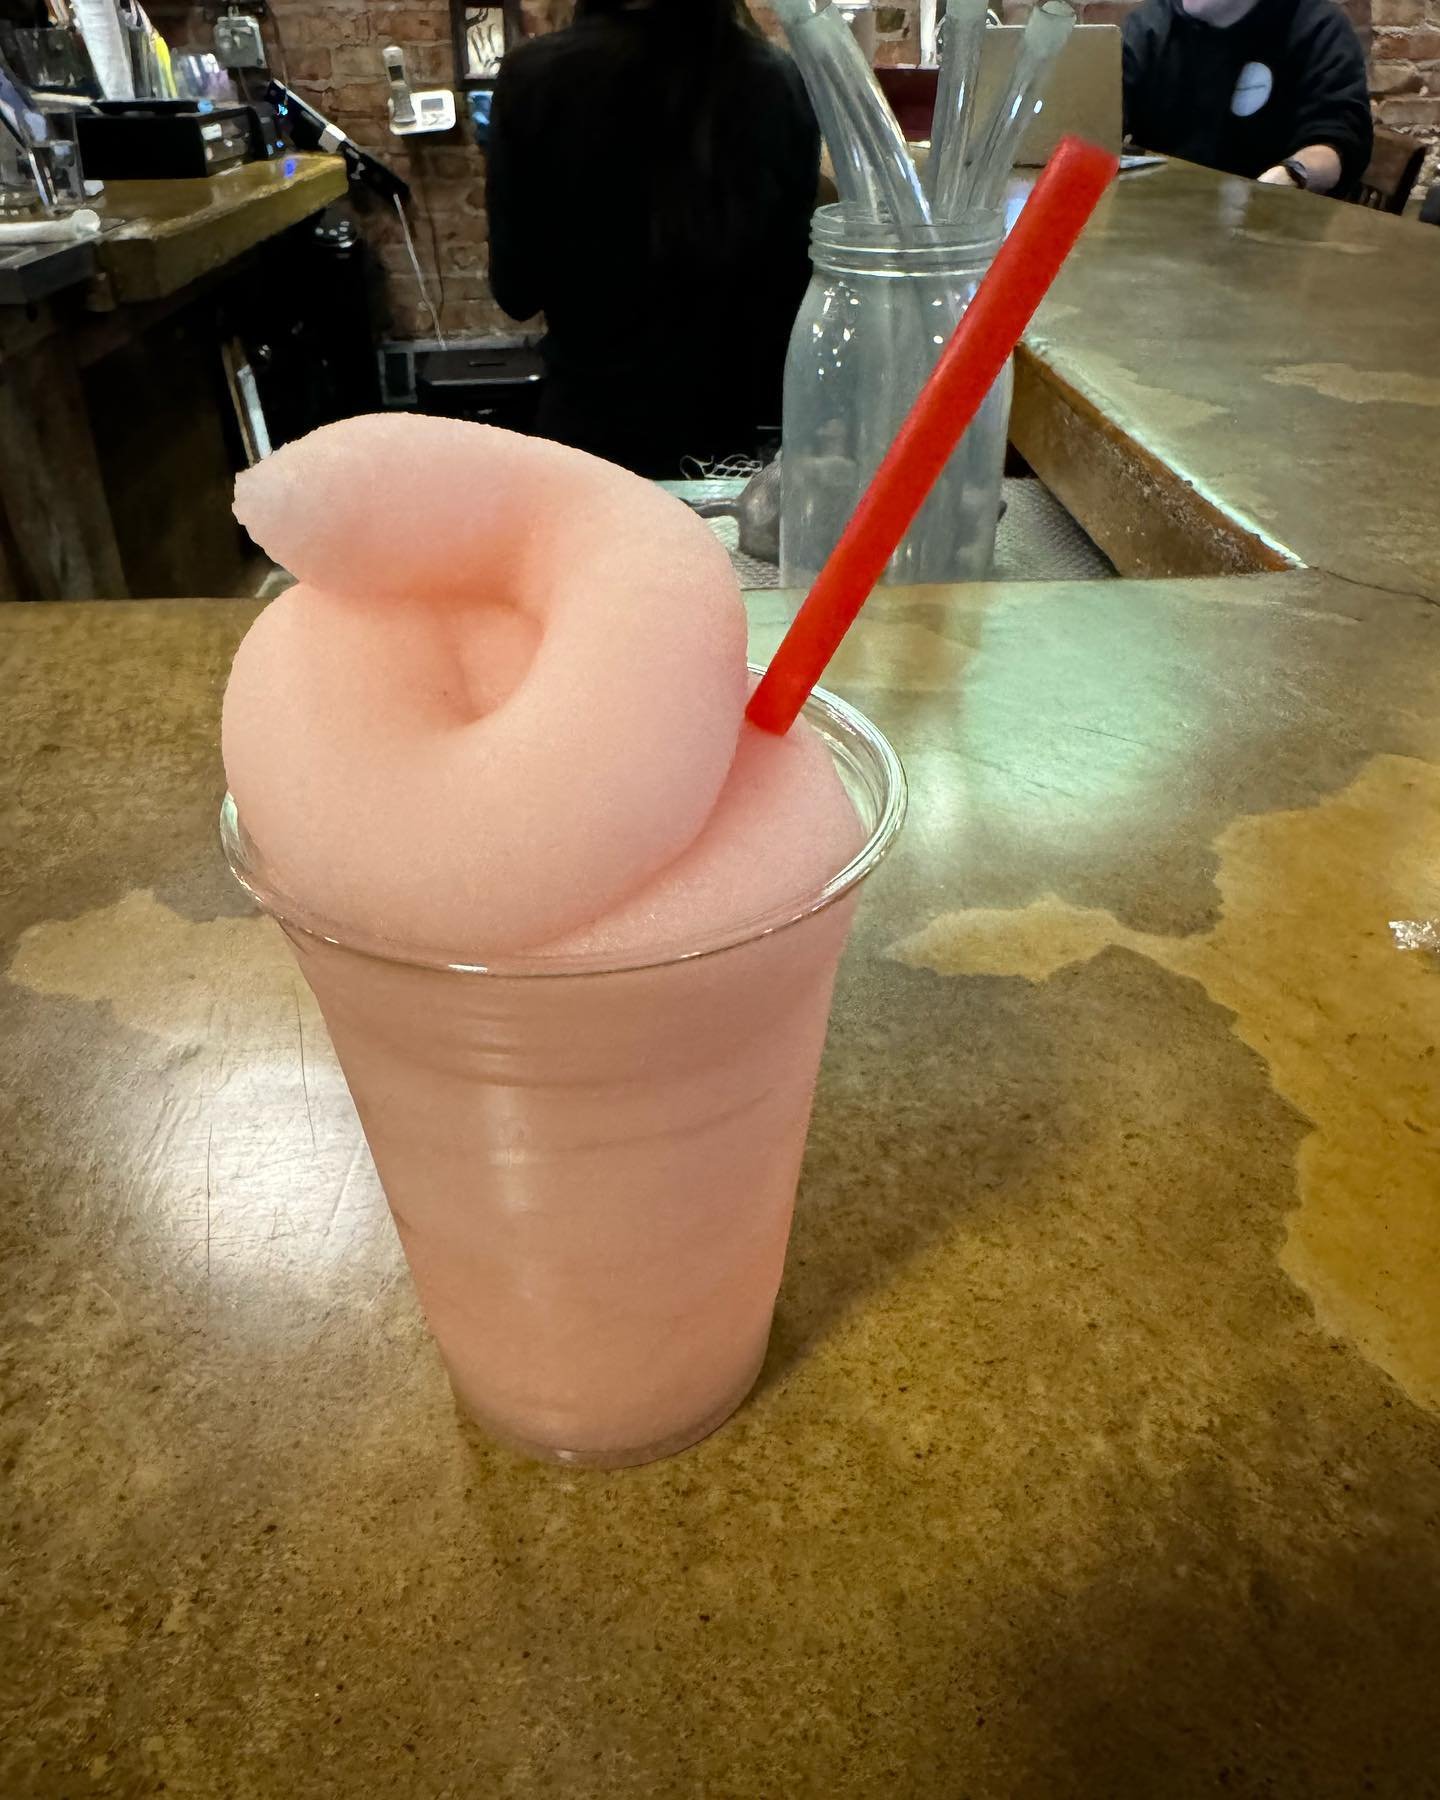 Something fun this week folks.  Stop by the brewery and have an all new frozen seltzer.  Different flavors as we proceed through the week.  Something to bring the winter back in Winter Carnival this winter&hellip;. Tonight&rsquo;s strawberry lemonade